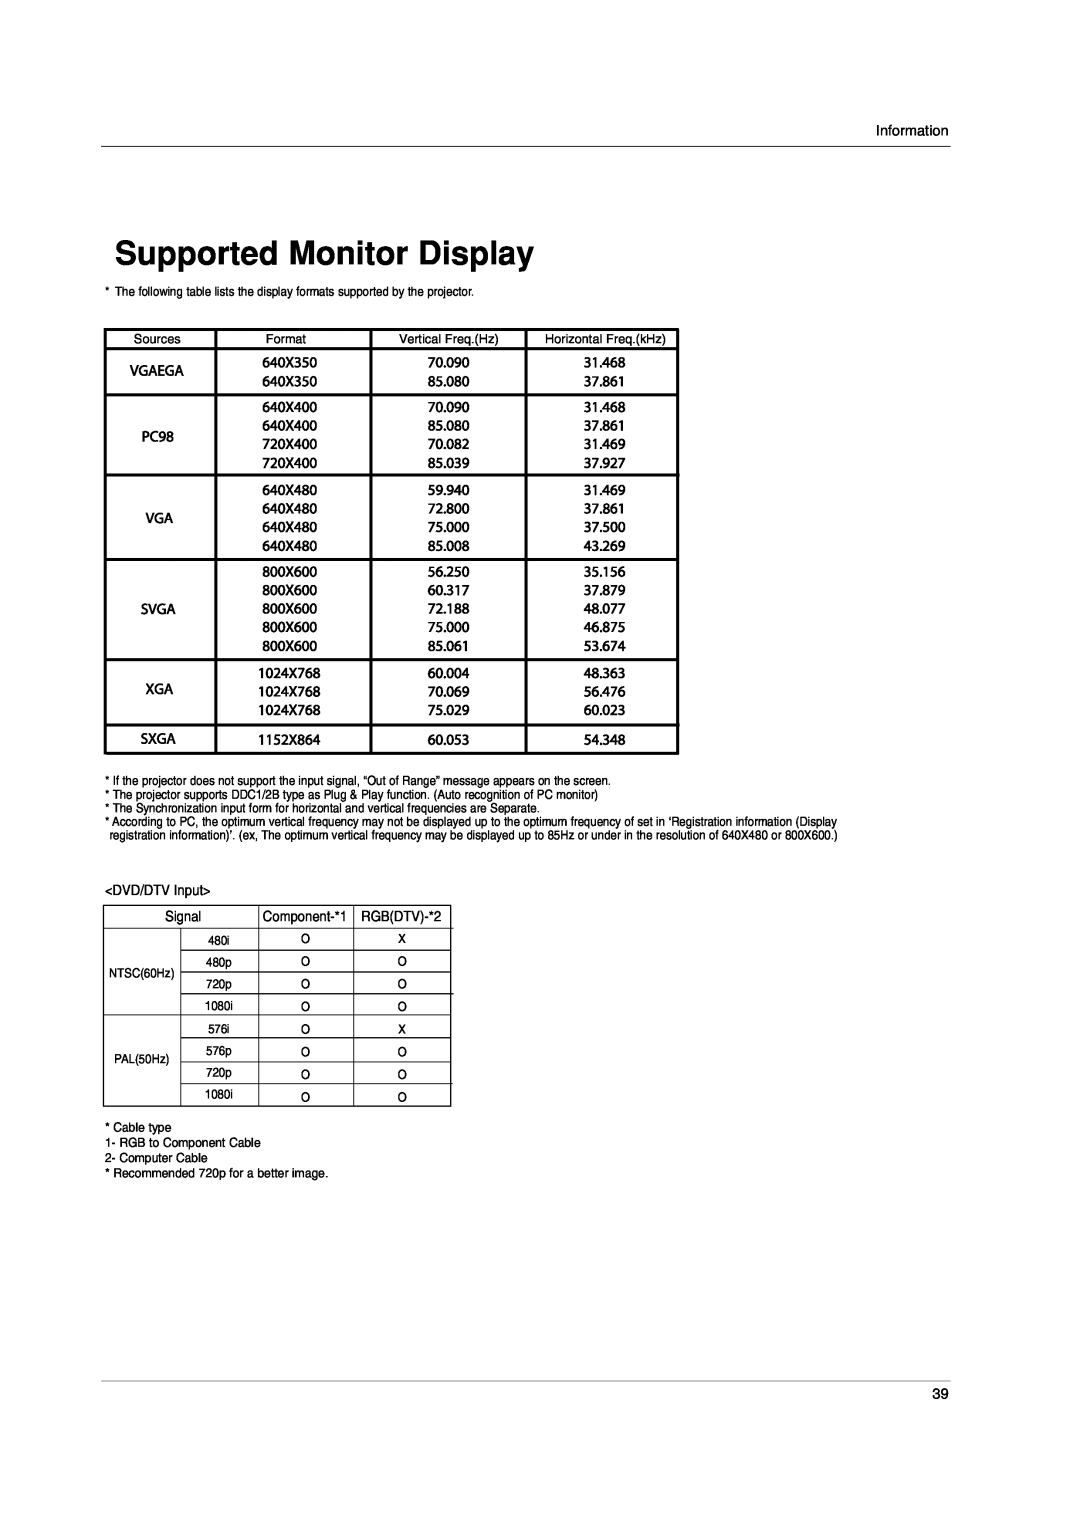 LG Electronics HS102 owner manual Supported Monitor Display, Information, DVD/DTV Input, Signal, RGBDTV-*2 